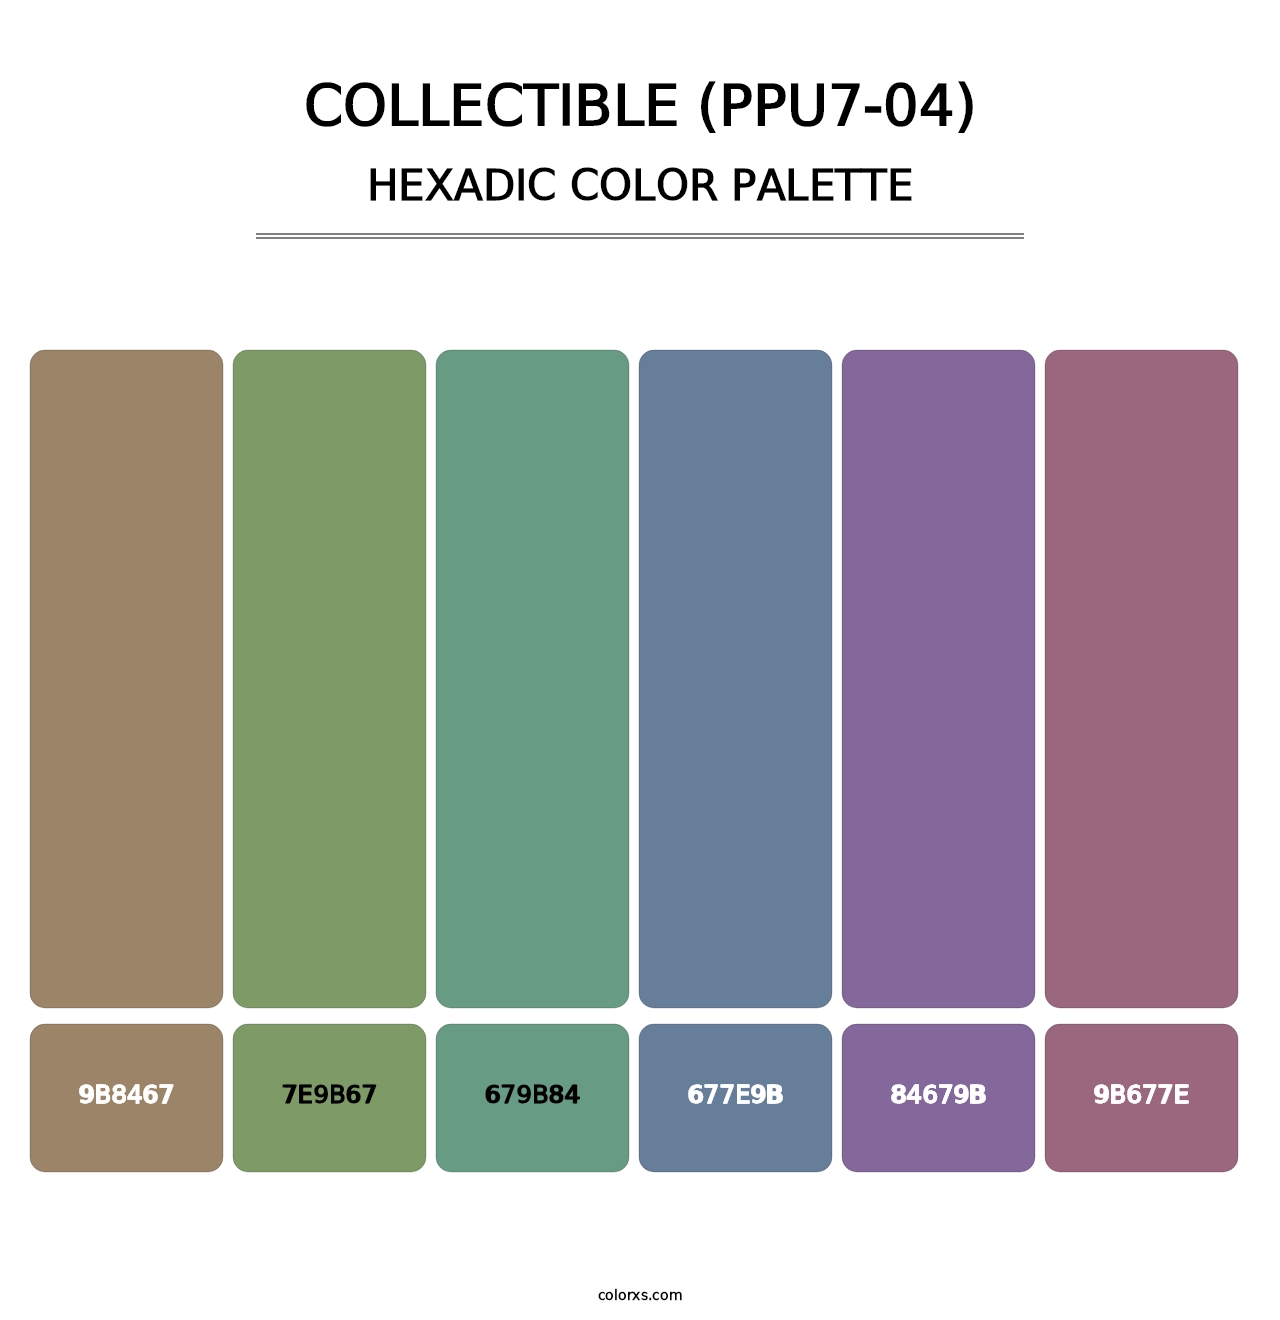 Collectible (PPU7-04) - Hexadic Color Palette